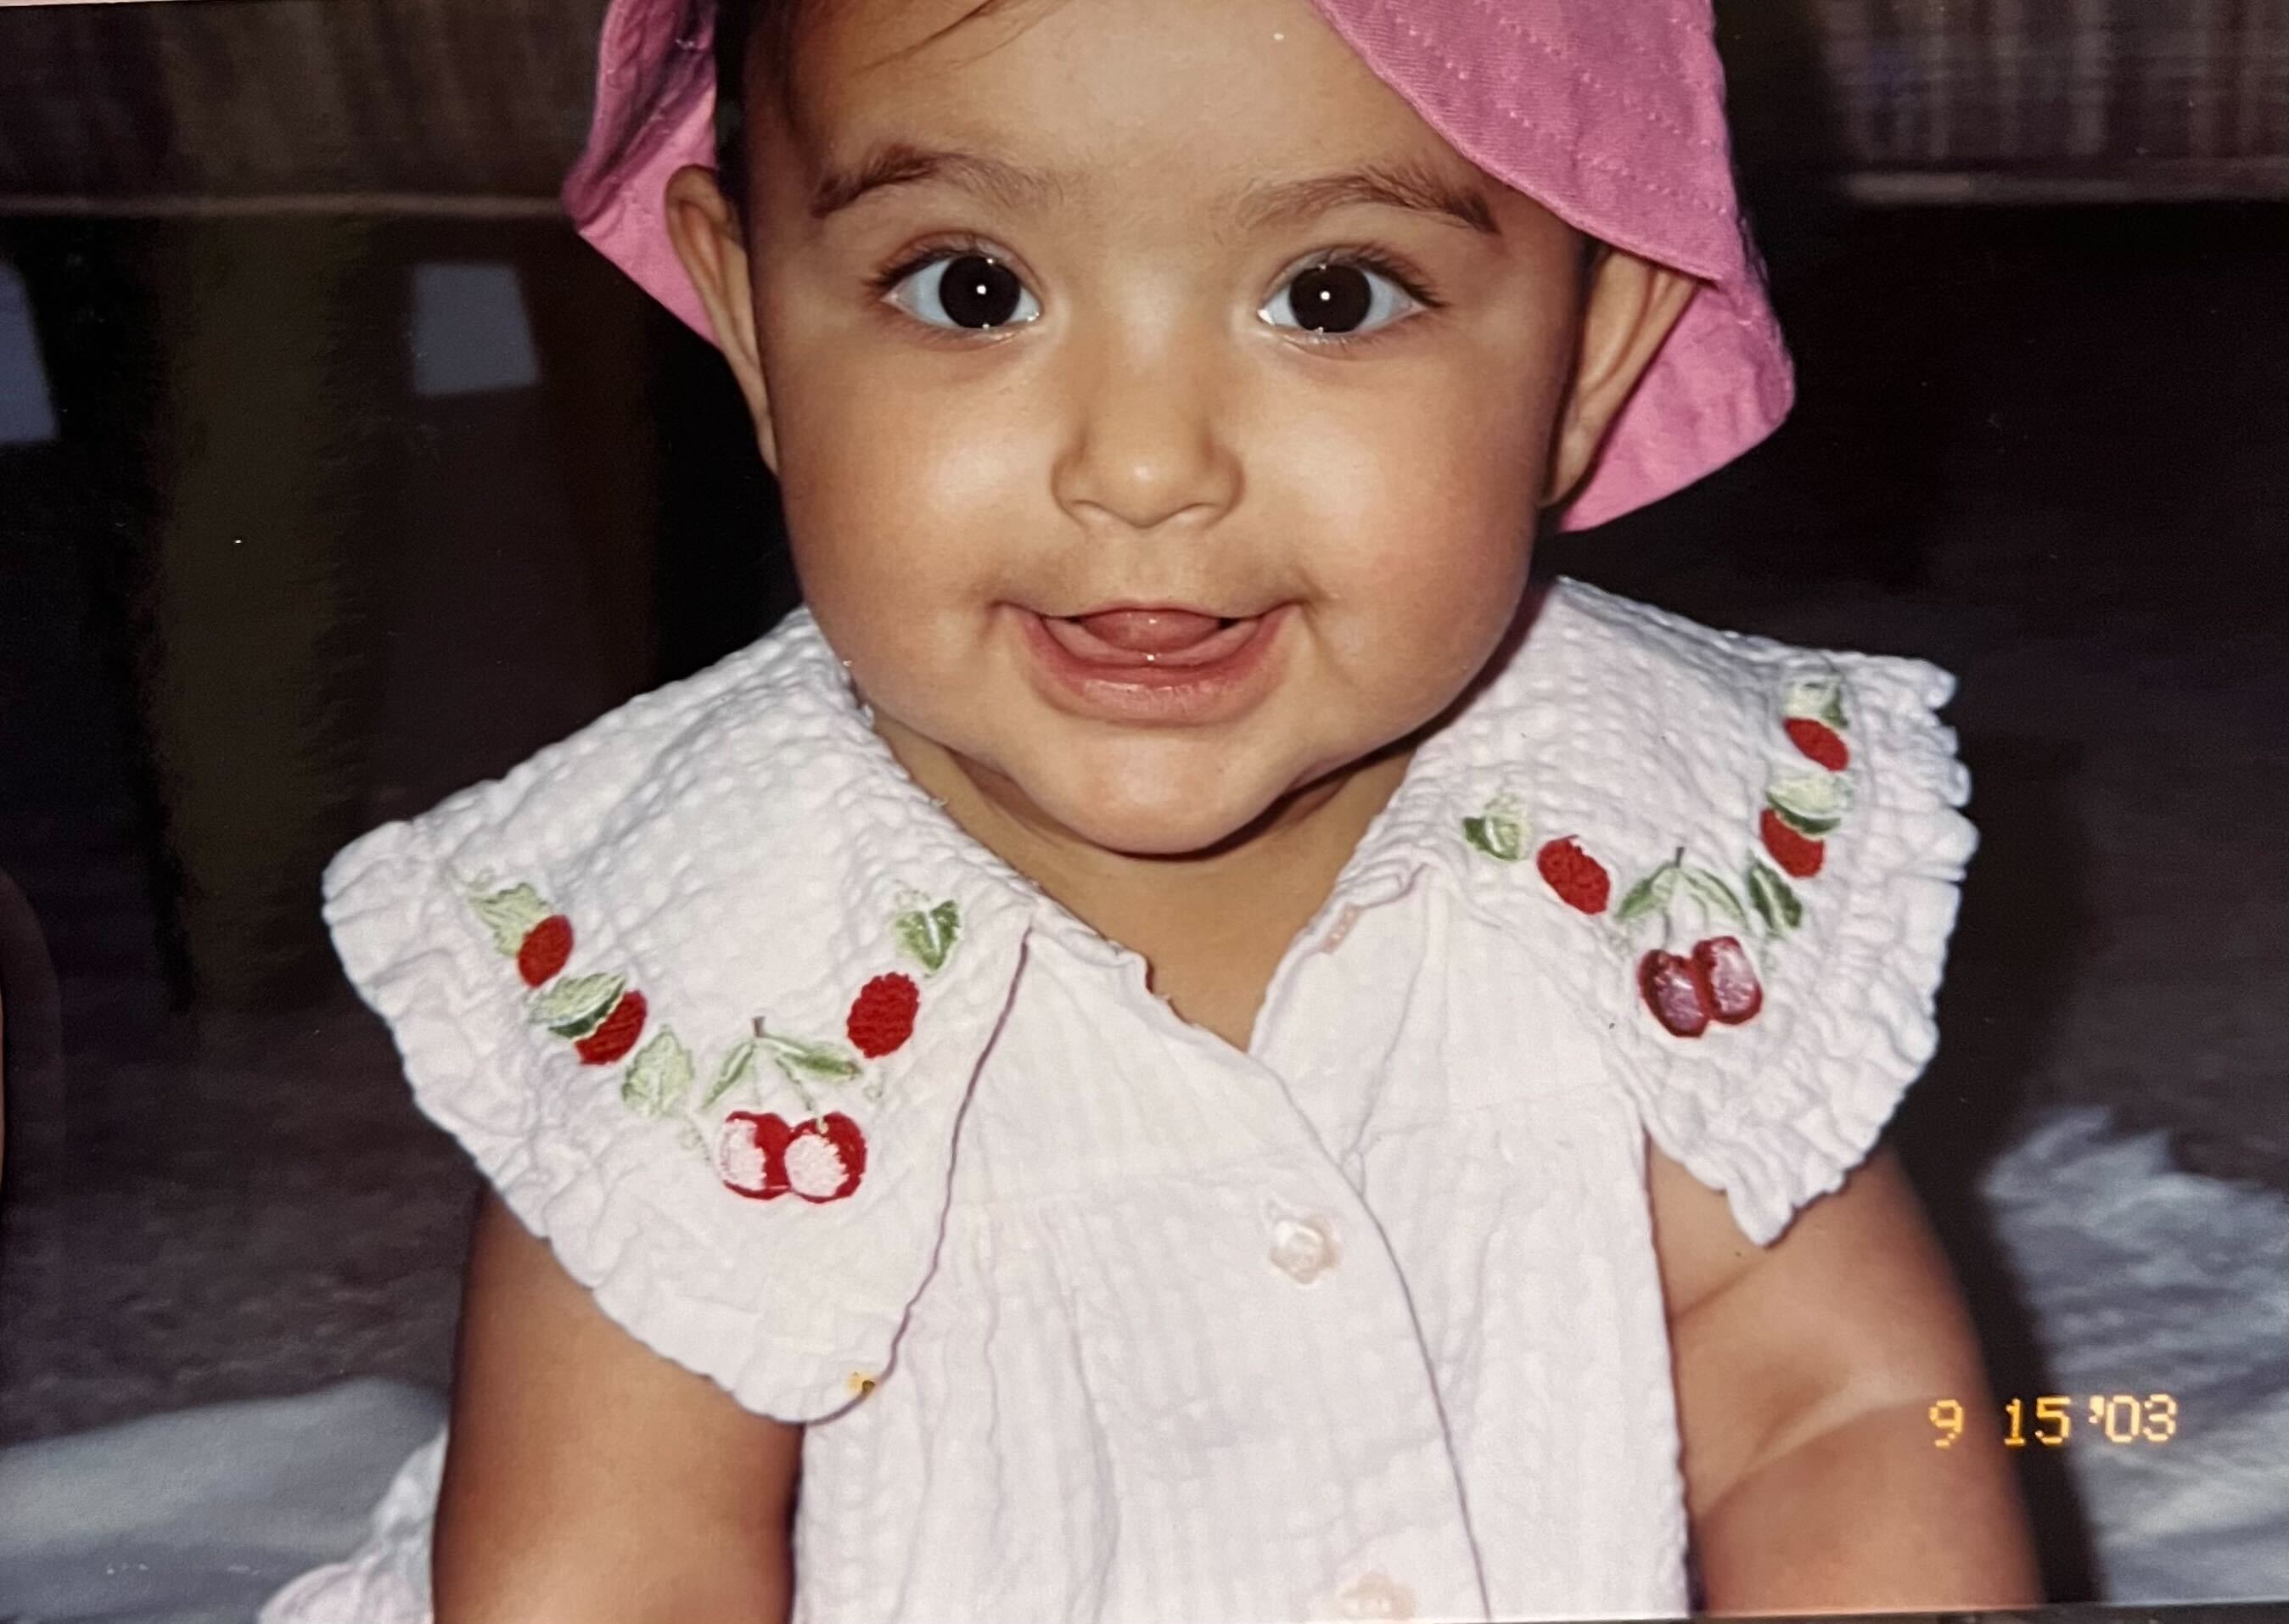 Baby Serena flashes a toothless grin. She wears a white collared shirt embroidered with cherries and a pink bucket hat.